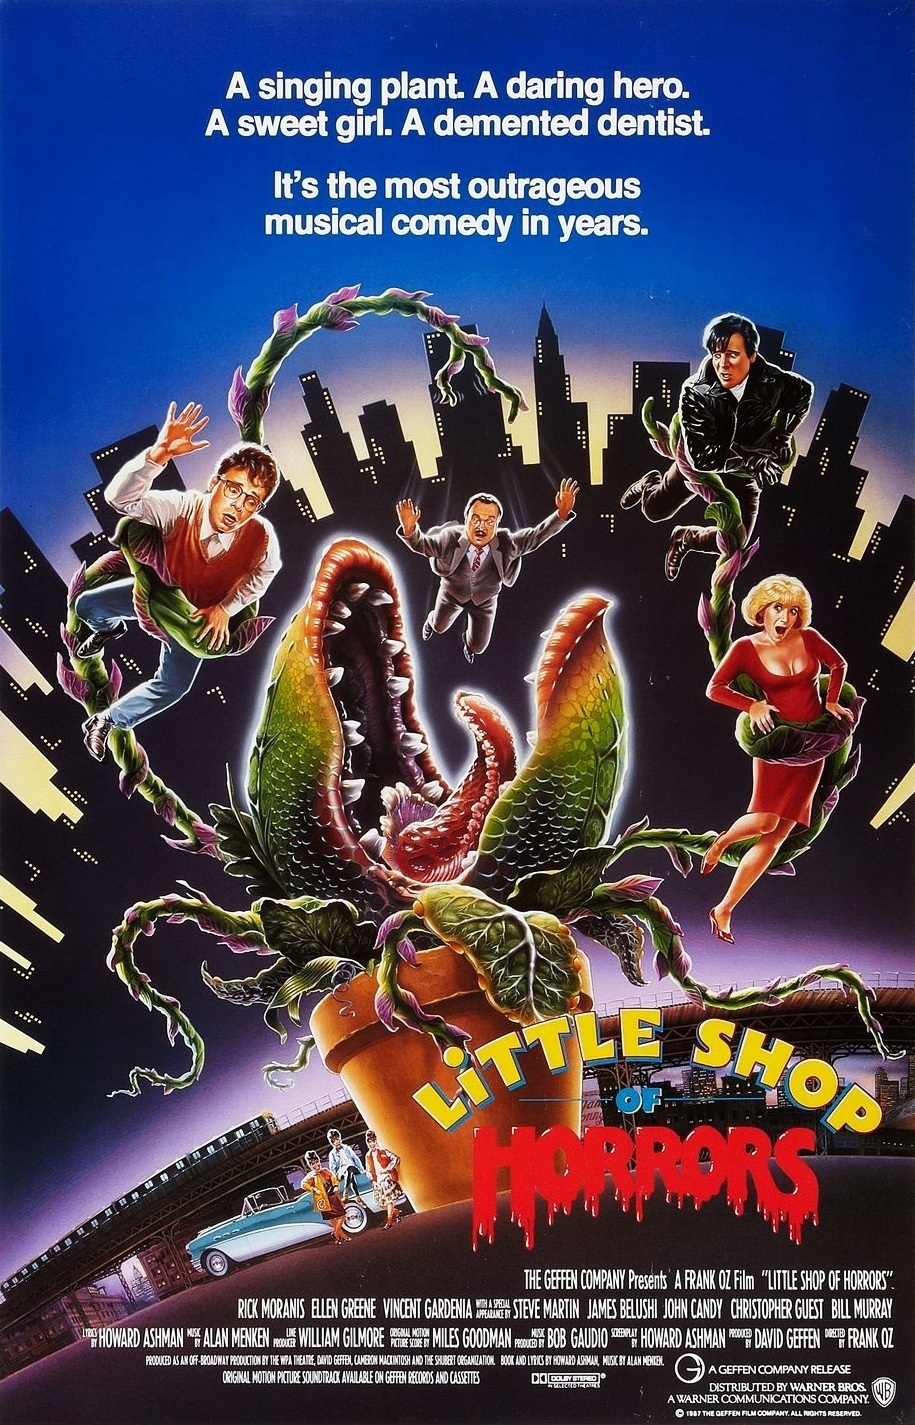 Movie theater poster for Little shop of horrors showing the plant and cast in front of a city skyline